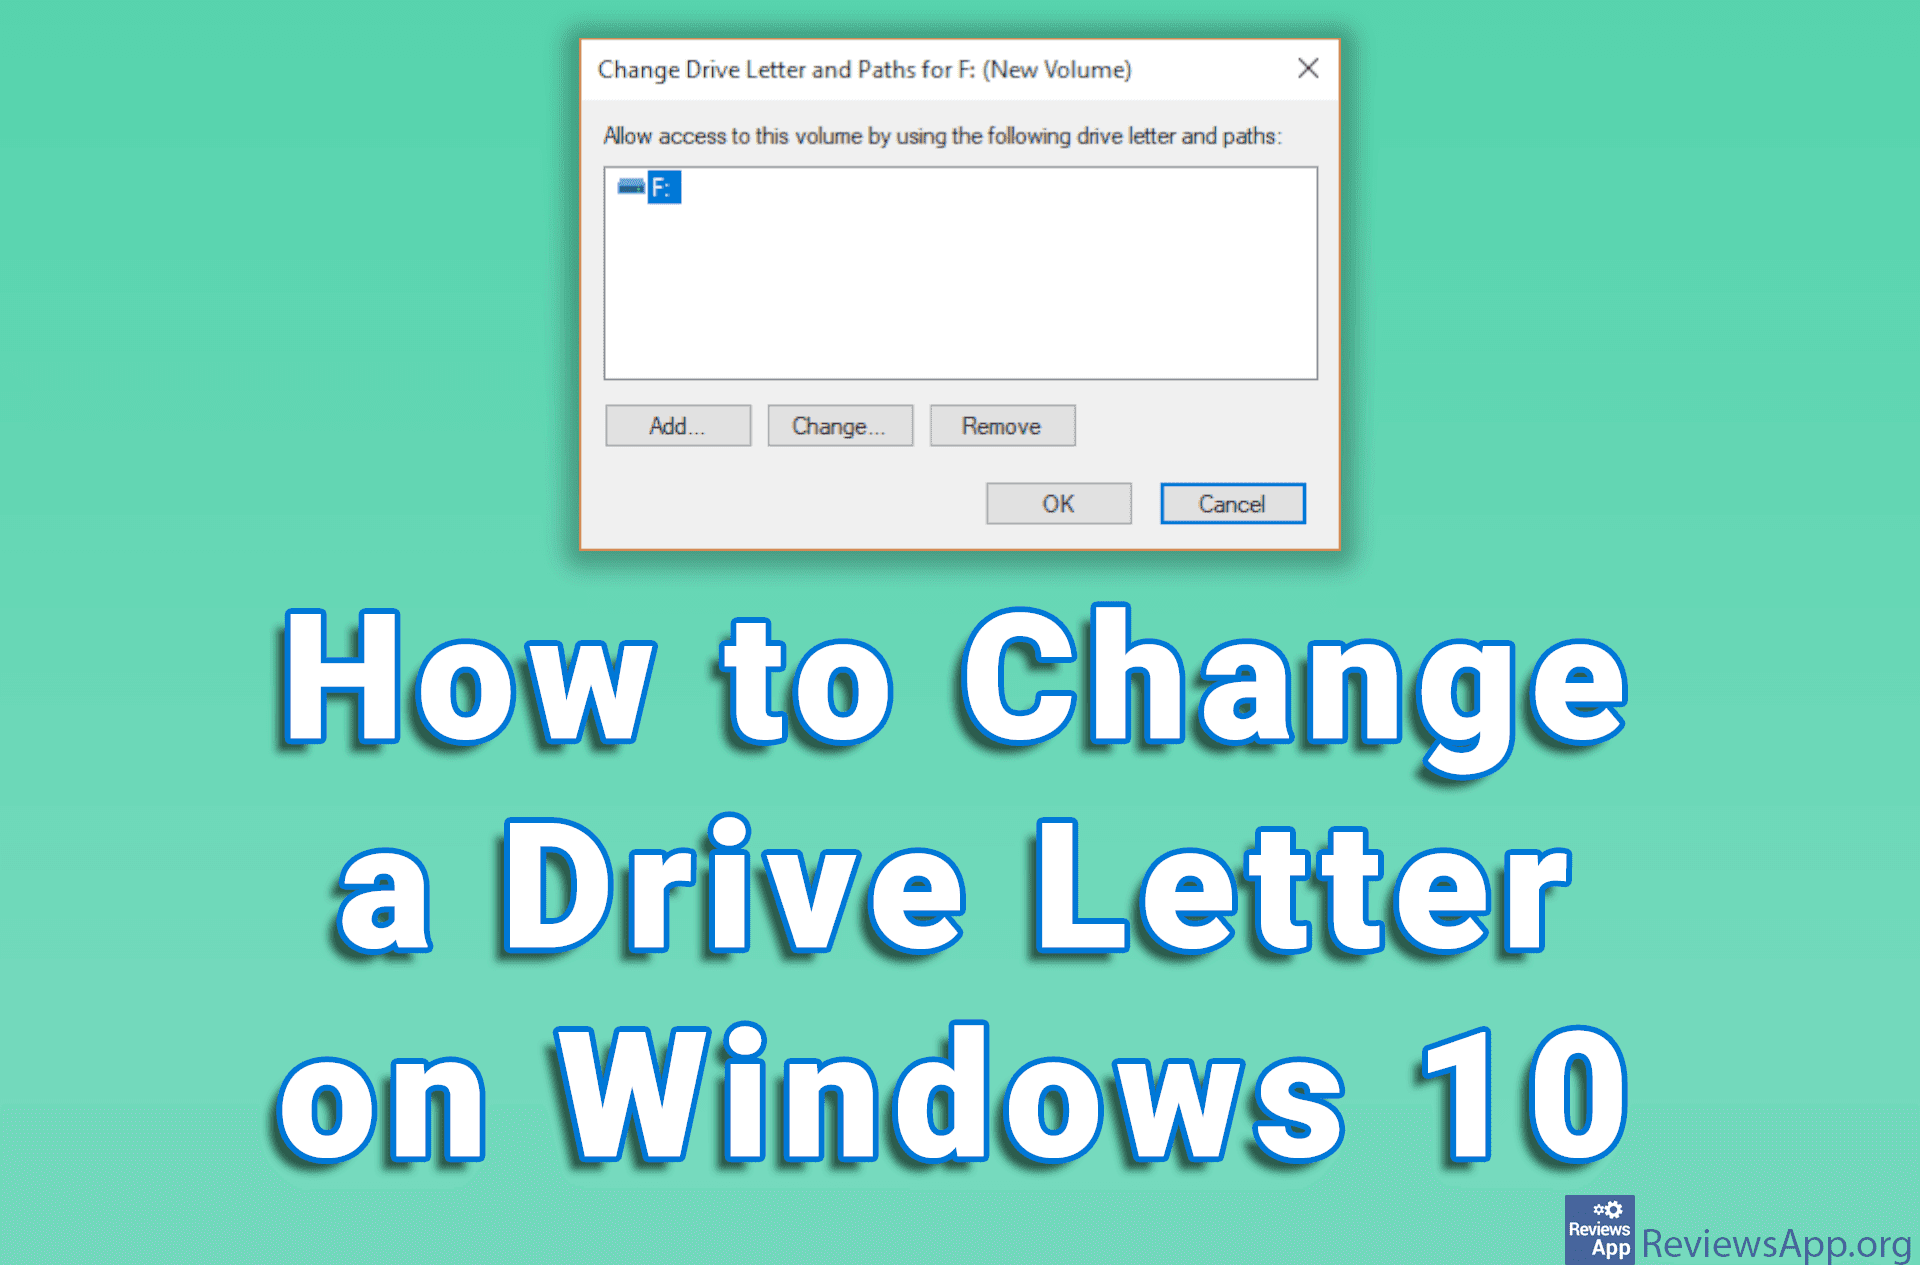 How to Change a Drive Letter on Windows 10